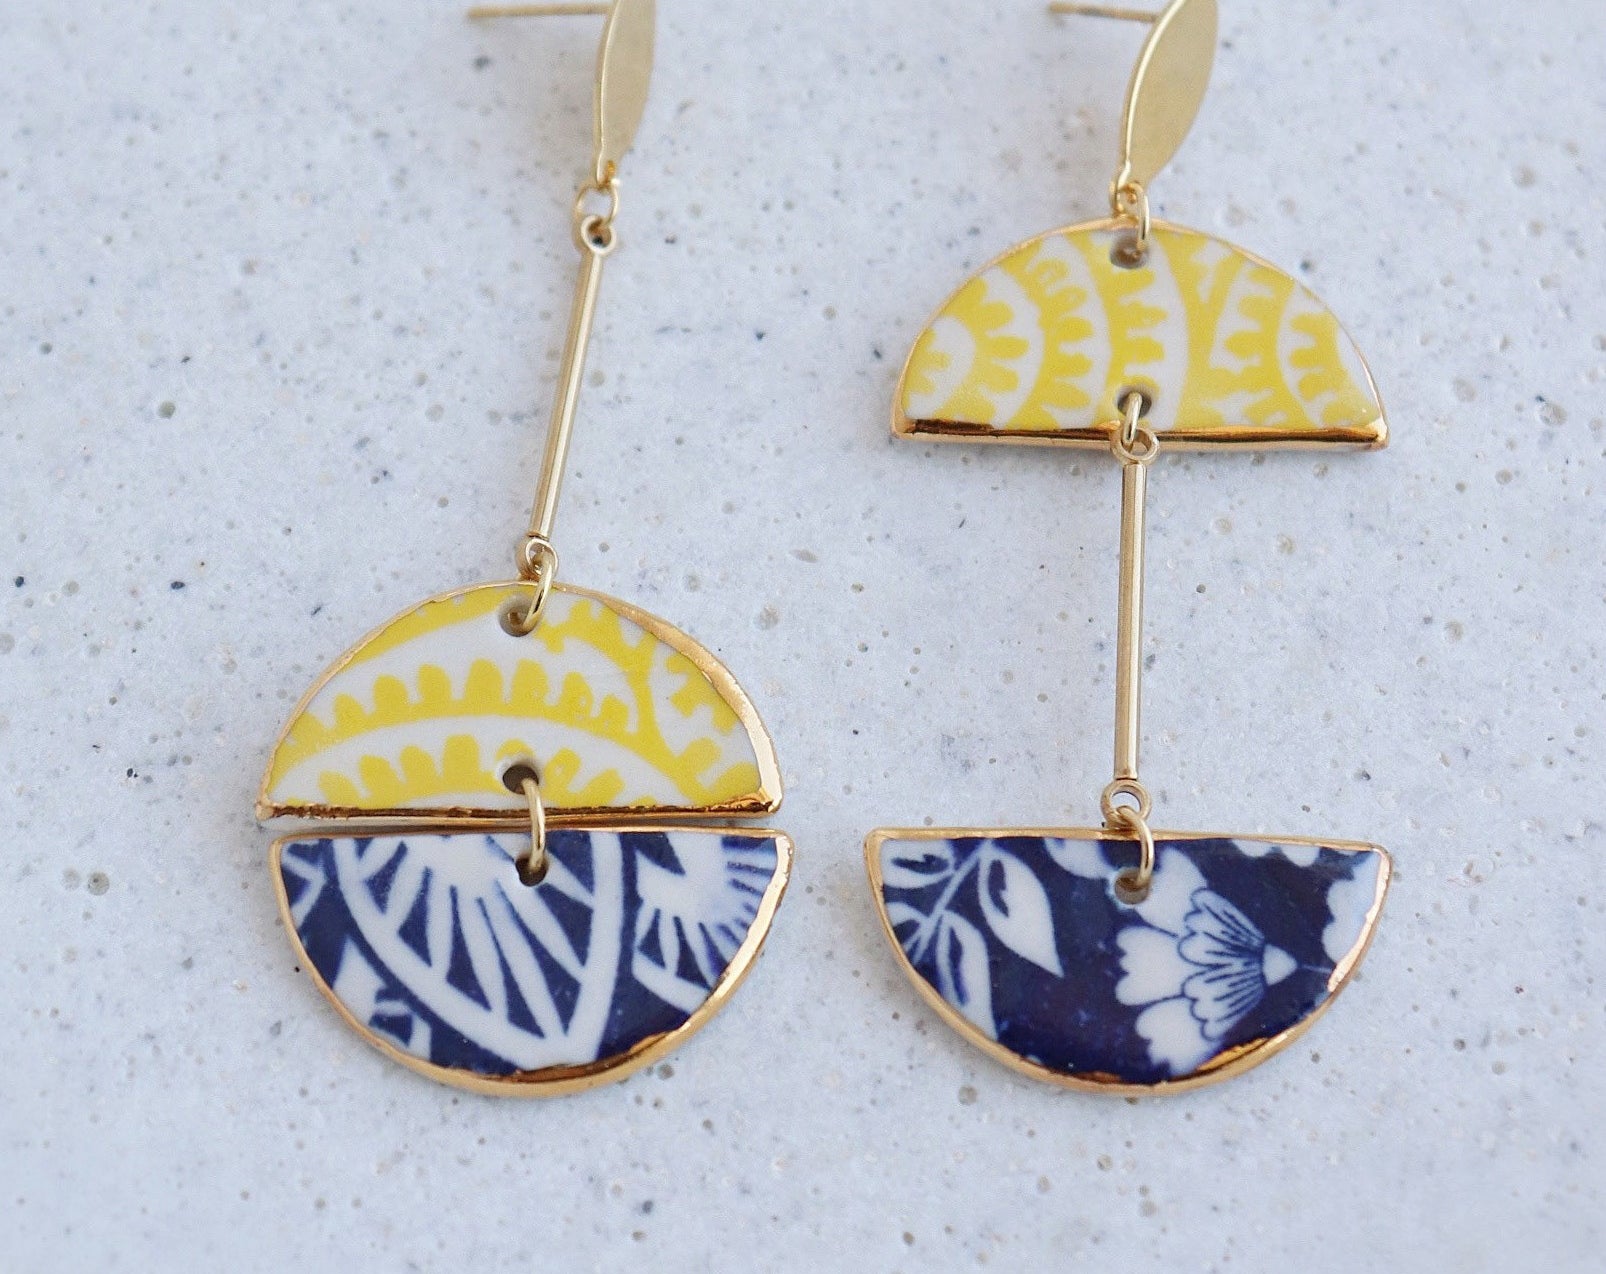 A pair of earrings on a plain background